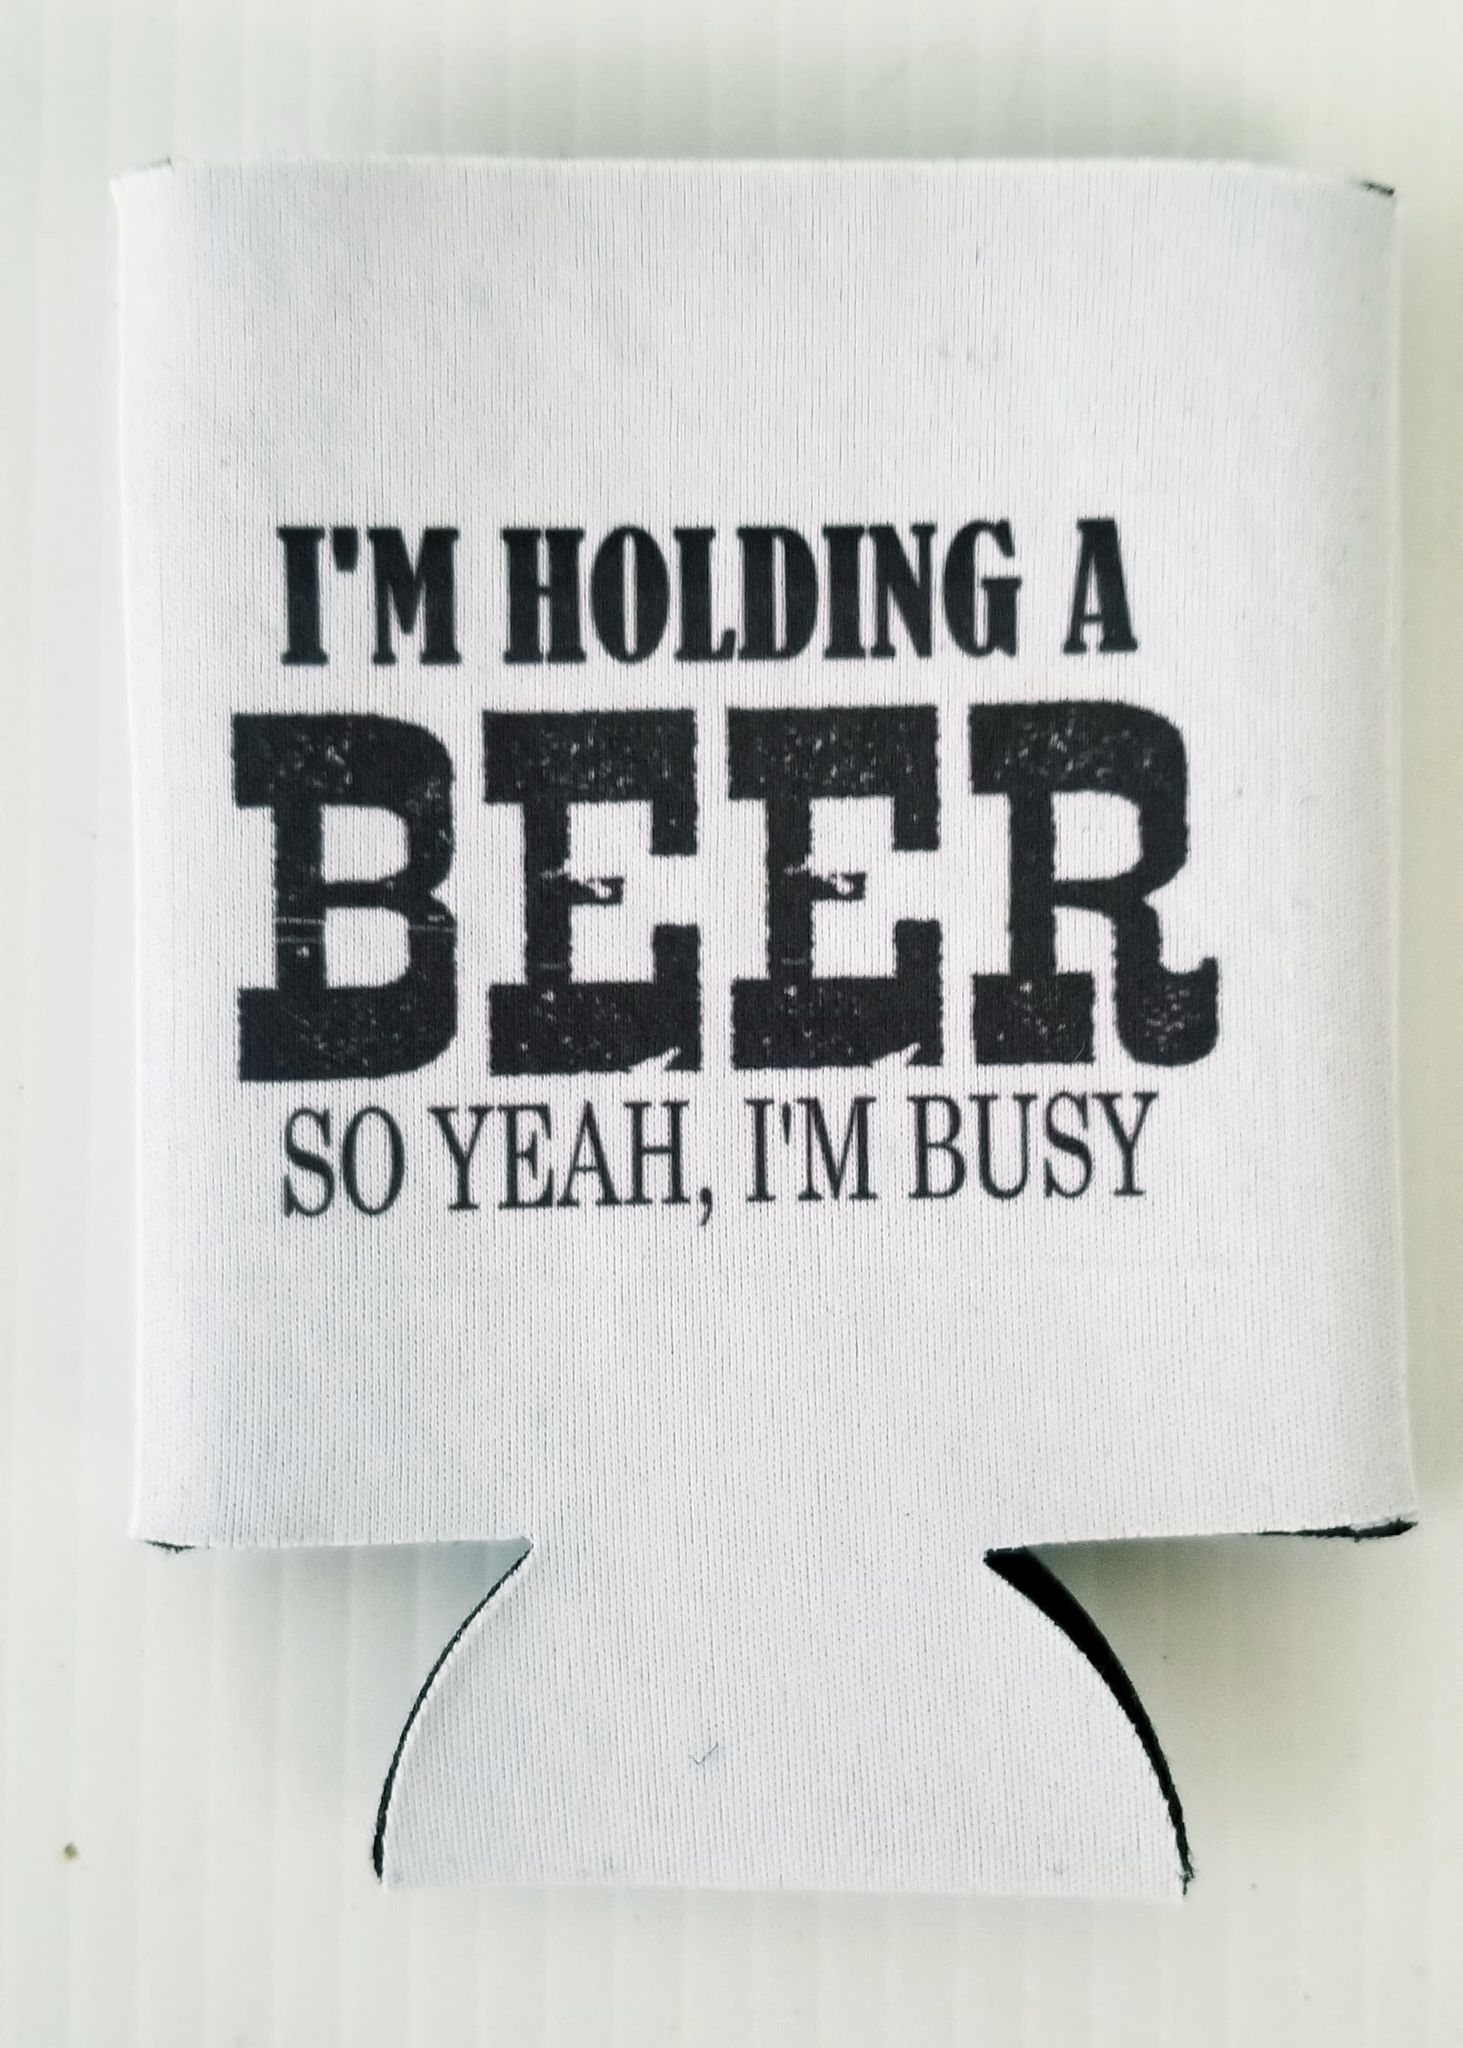 Can Coozies (Multiple Designs)